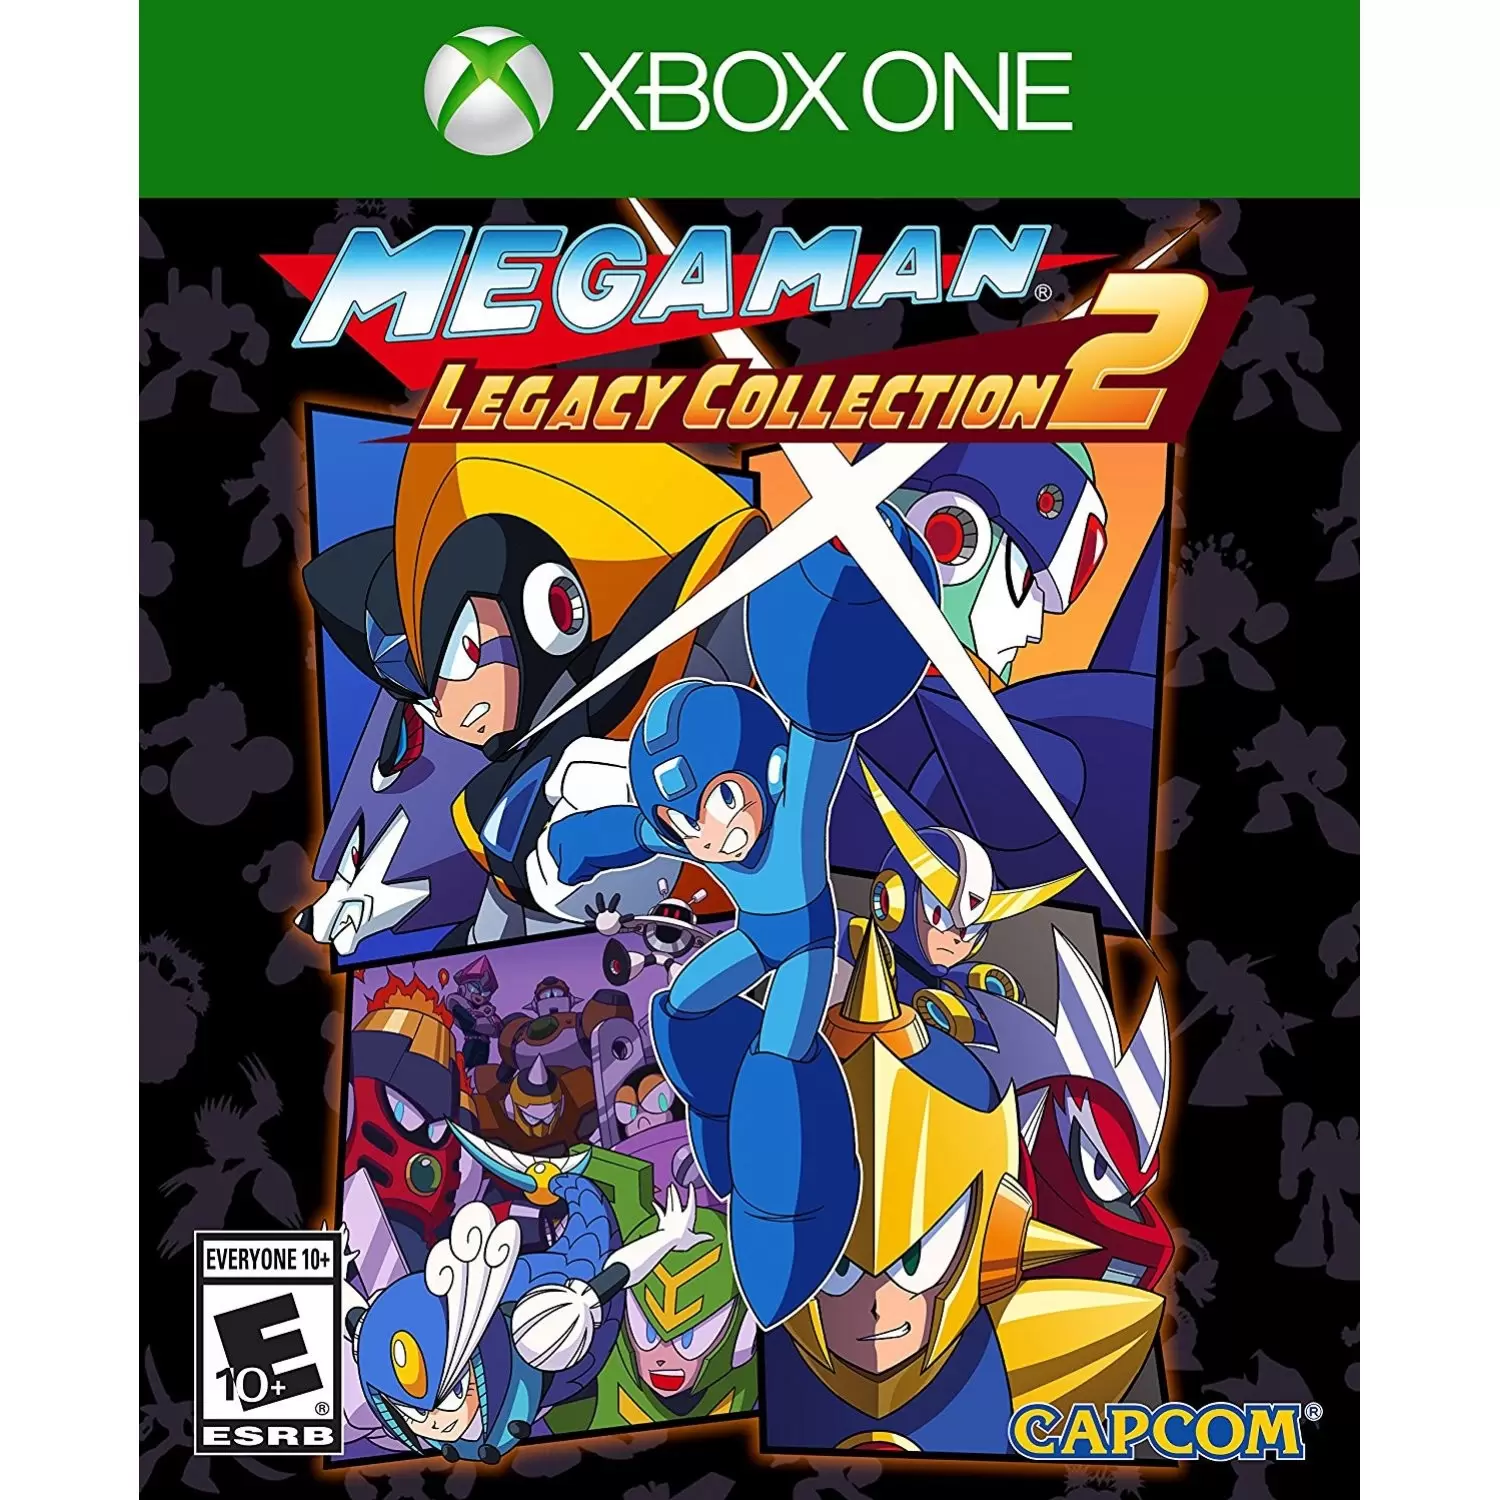 XBOX One Games - Mega Man Legacy Collection 2